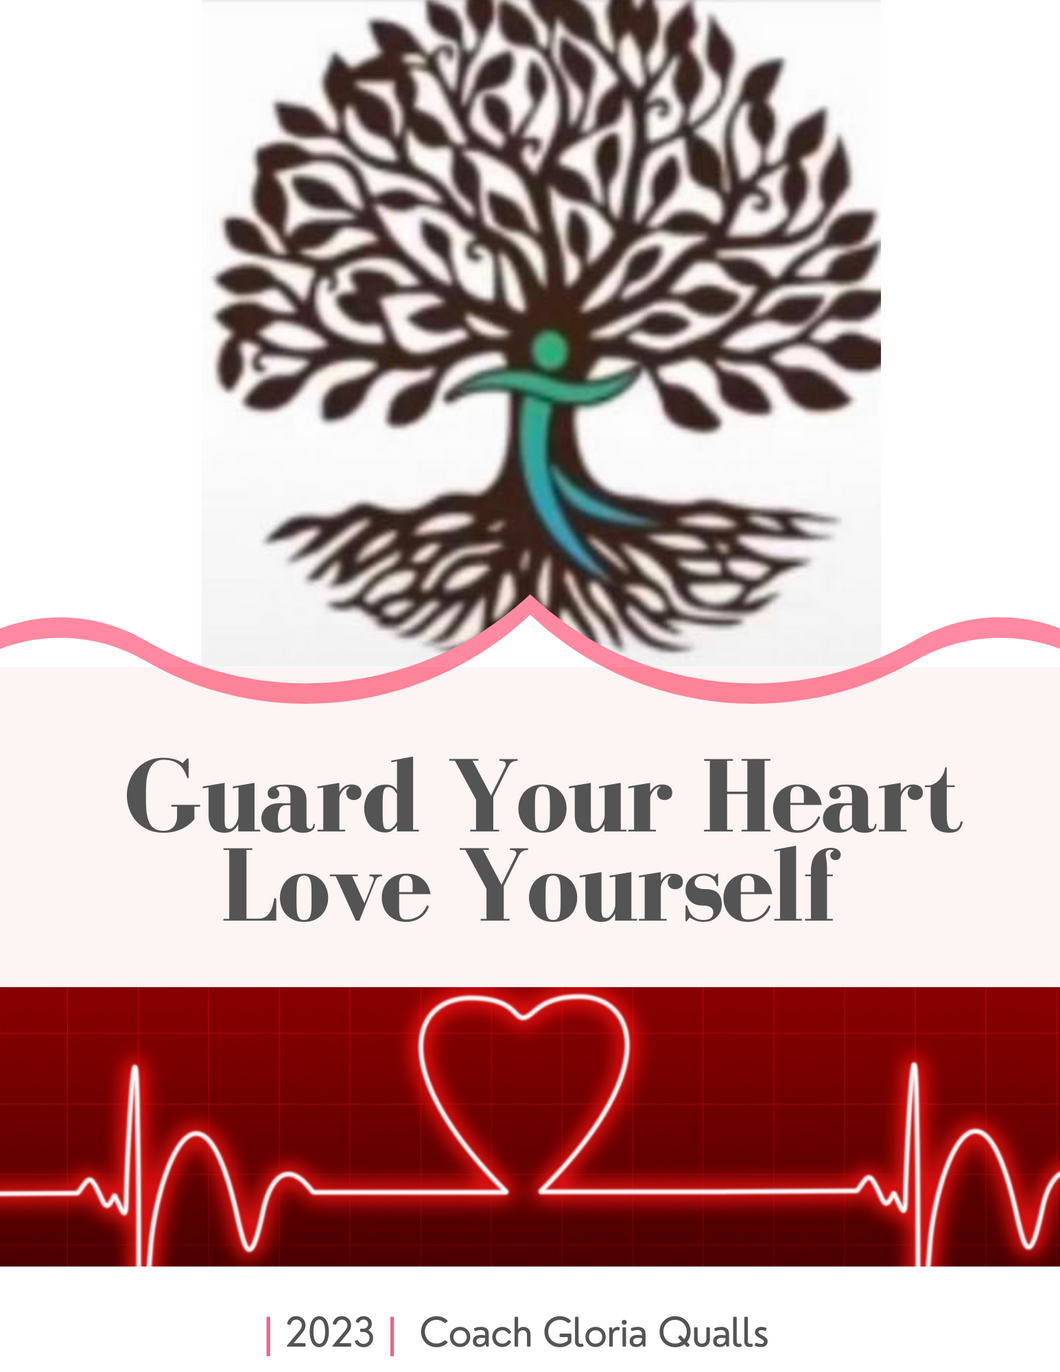 Guard your heart love yourself movement